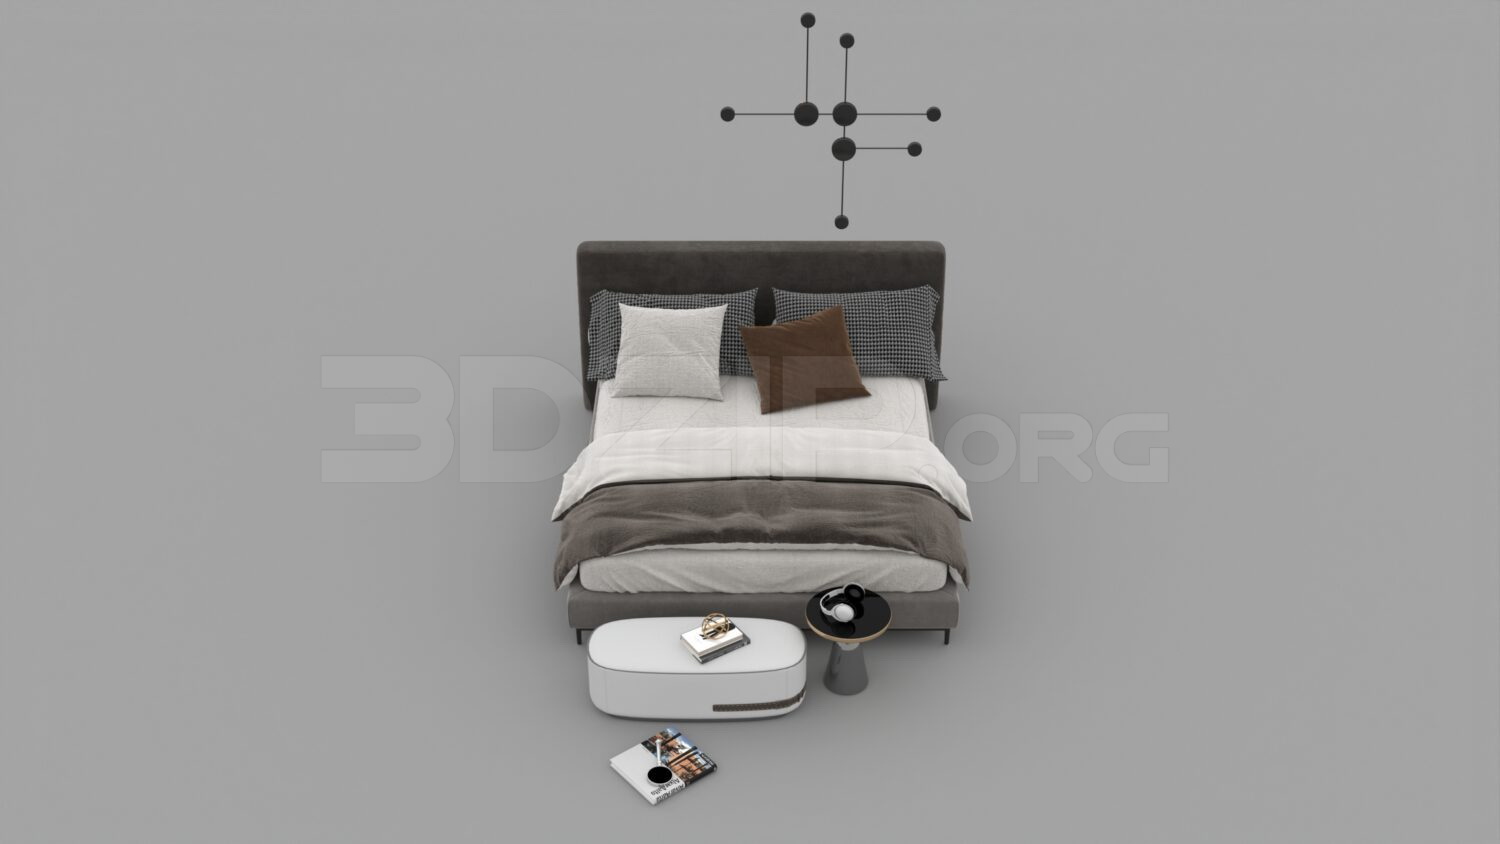 1716. Download Free Bed Model By Se Arc